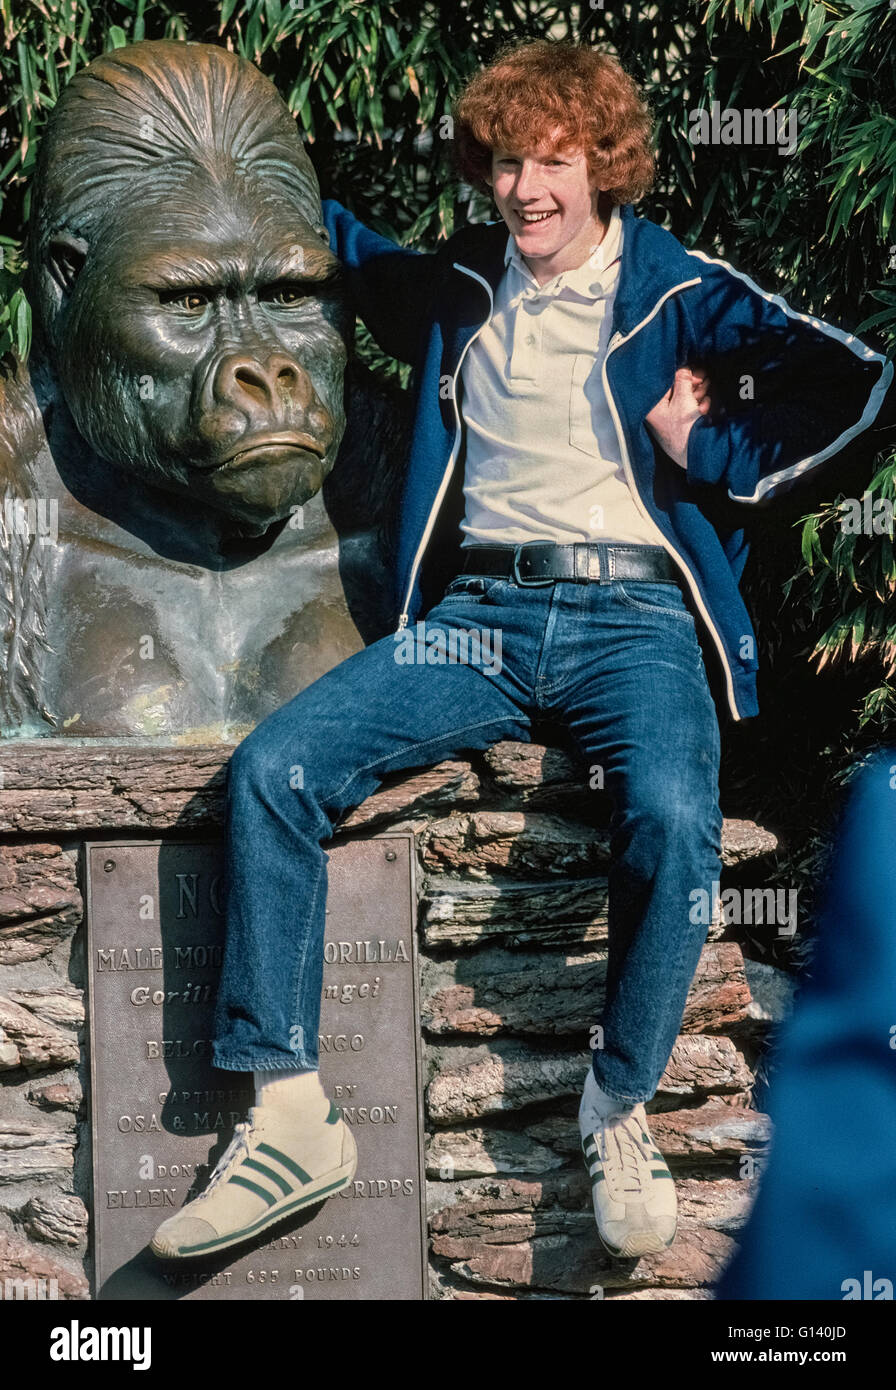 A monument with the frowning face of a male gorilla from Africa appears upset that a teenage boy with one hand under his armpit is trying to mimic the great ape while visiting the world-famous San Diego Zoo in San Diego, California, USA. The bronze sculpture pays tribute to Ngagi, an eastern lowland gorilla captured in the then Belgian Congo and given to the zoo in 1931. The 635-pound ape died there in 1944. This bust was sculpted two years before Ngagi's death and continues to be a popular place to pose for pictures in the 100-acre zoo that is home to over 3,500 rare and endangered animals. Stock Photo